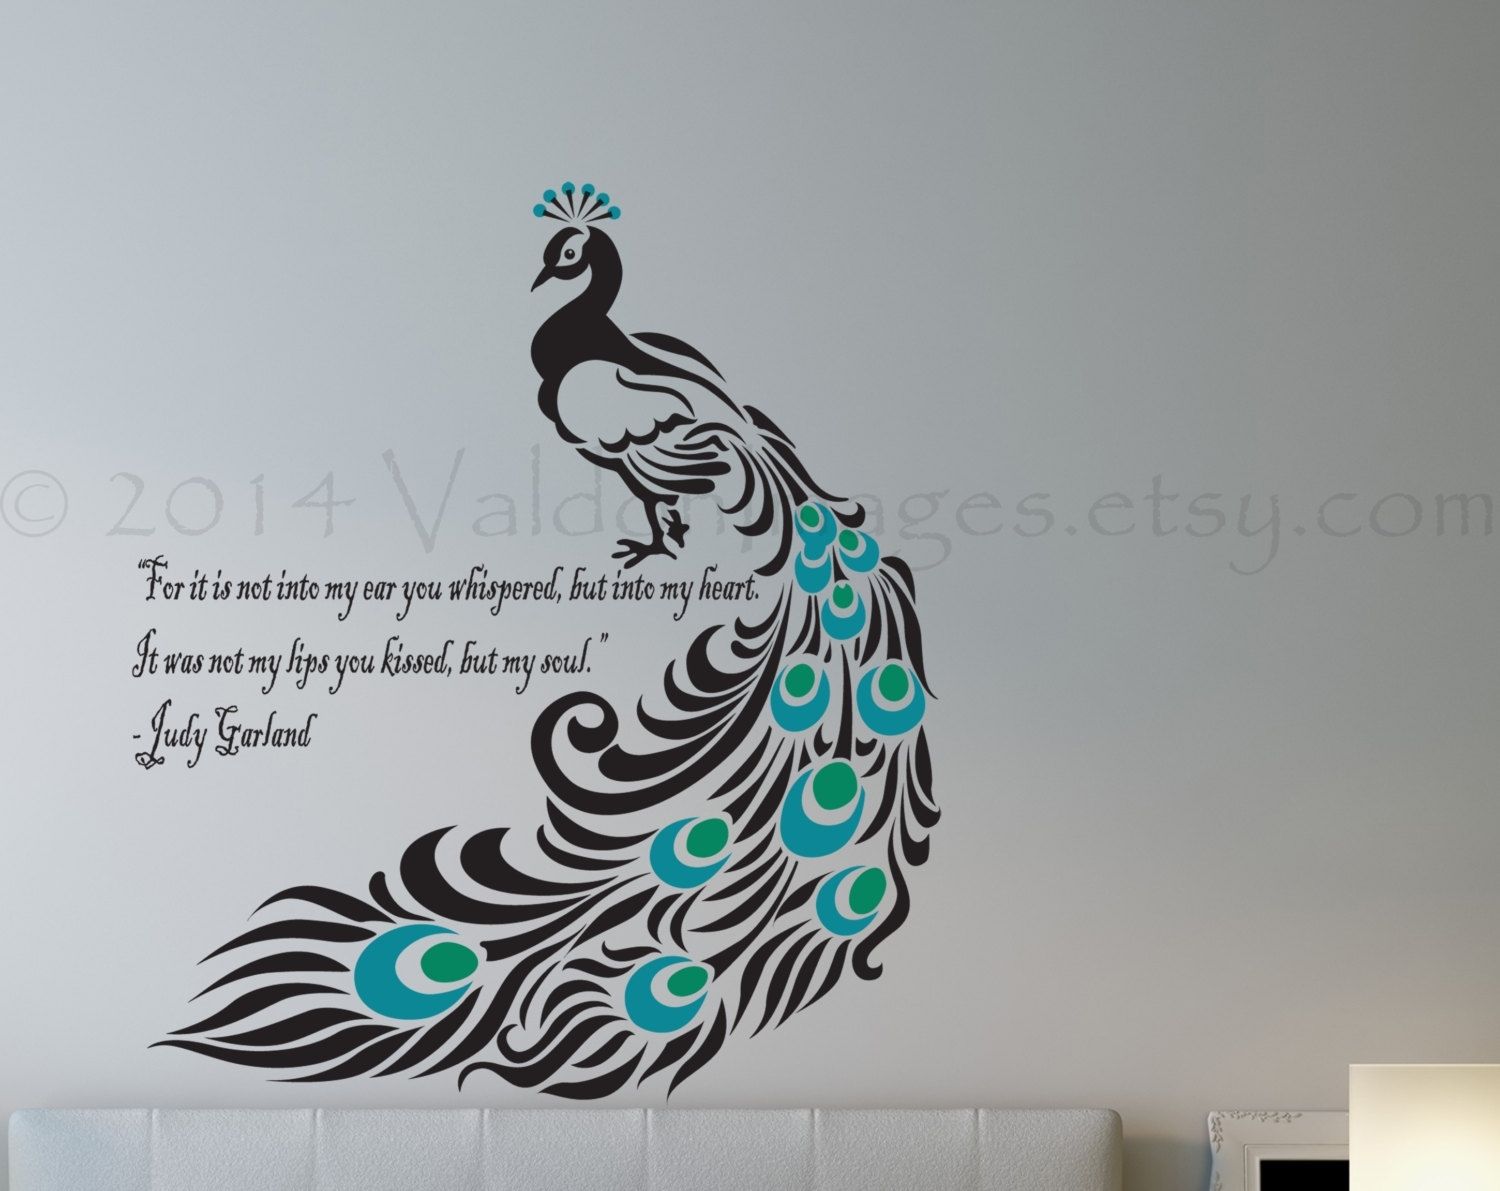 Peacock Wall Decal Epic Peacock Wall Art – Wall Decoration Ideas Intended For Current Peacock Wall Art (View 10 of 15)